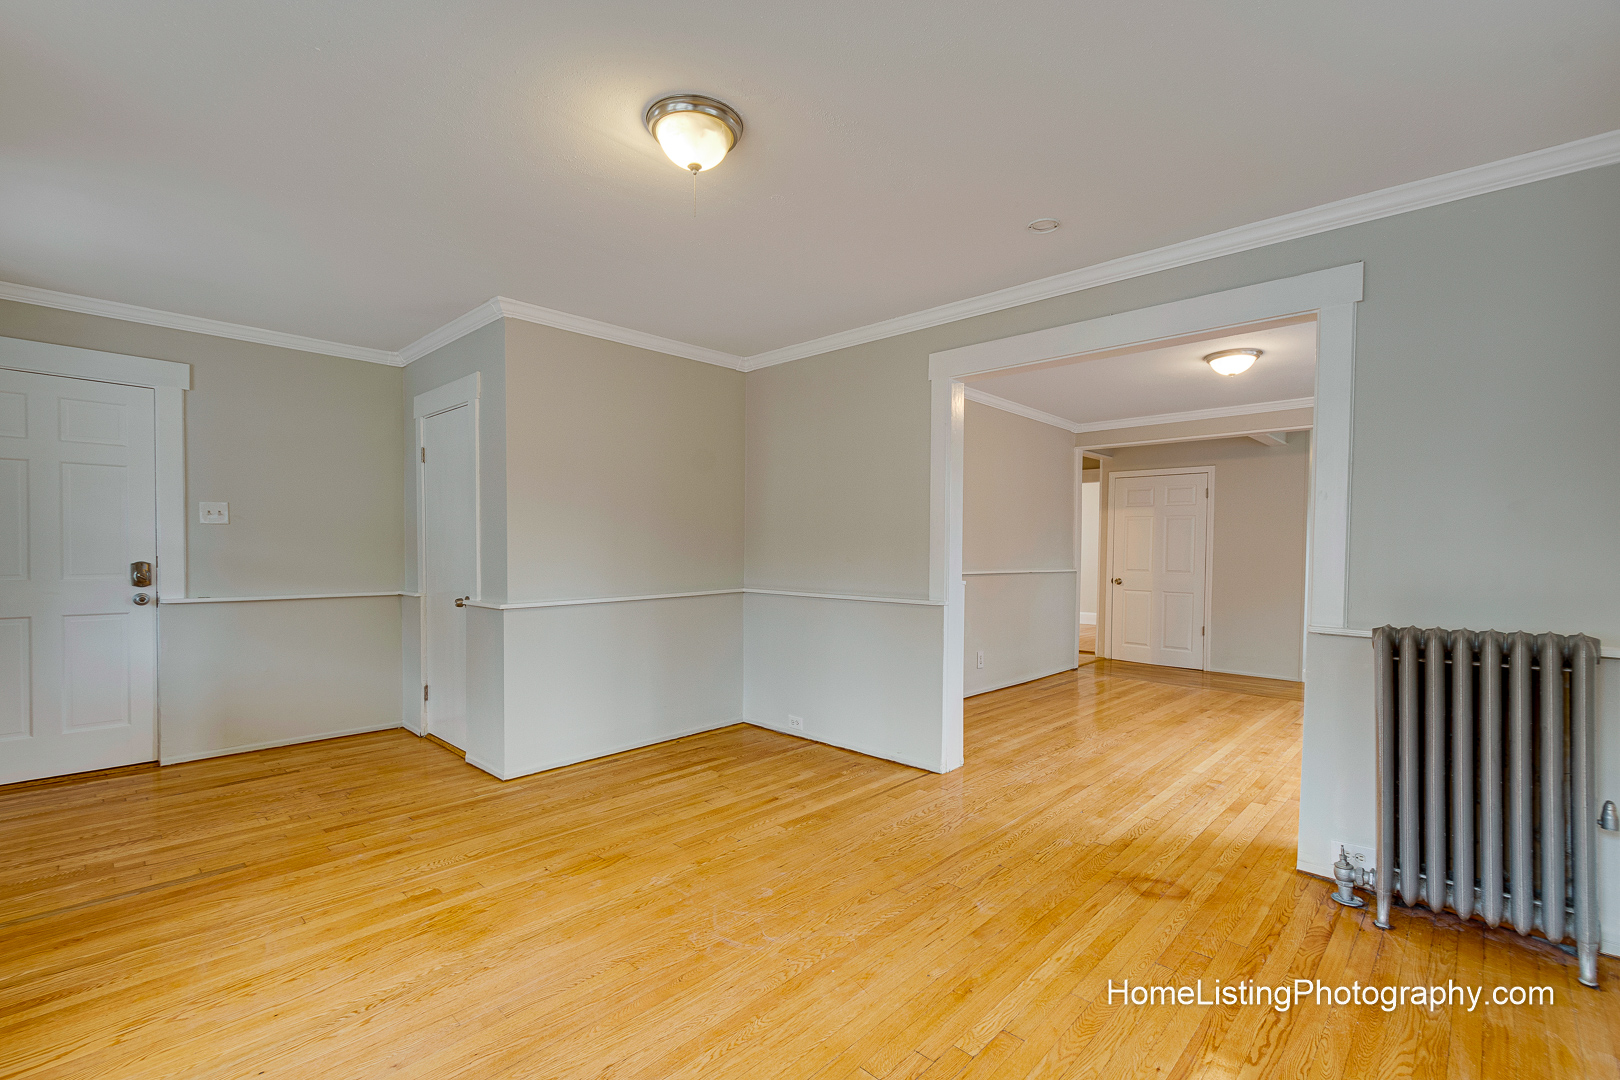 Thomas Adach - Brighton MA professional real estate photographer - 508-655-2225 Home Listing Photography